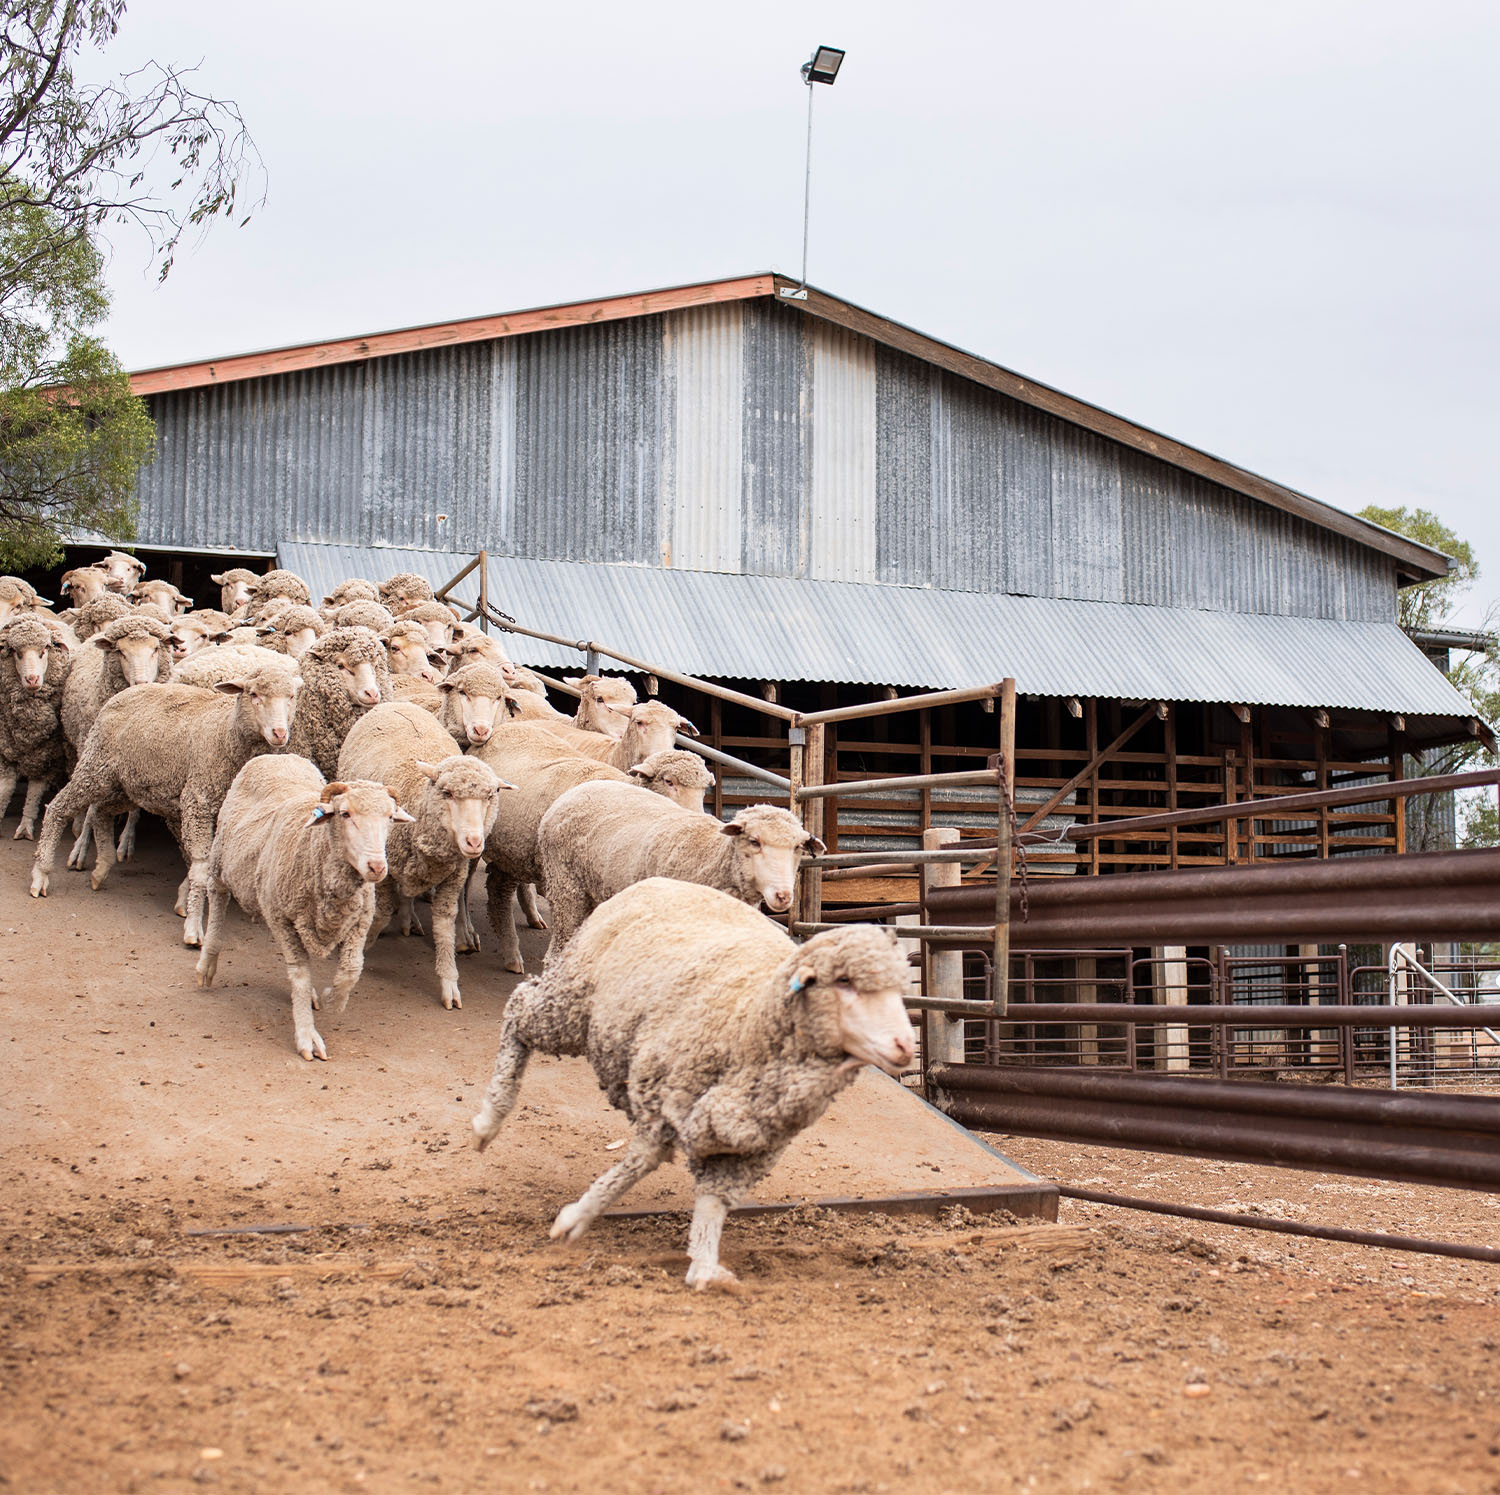 A flock of sheep running down a ramp at Nogo station